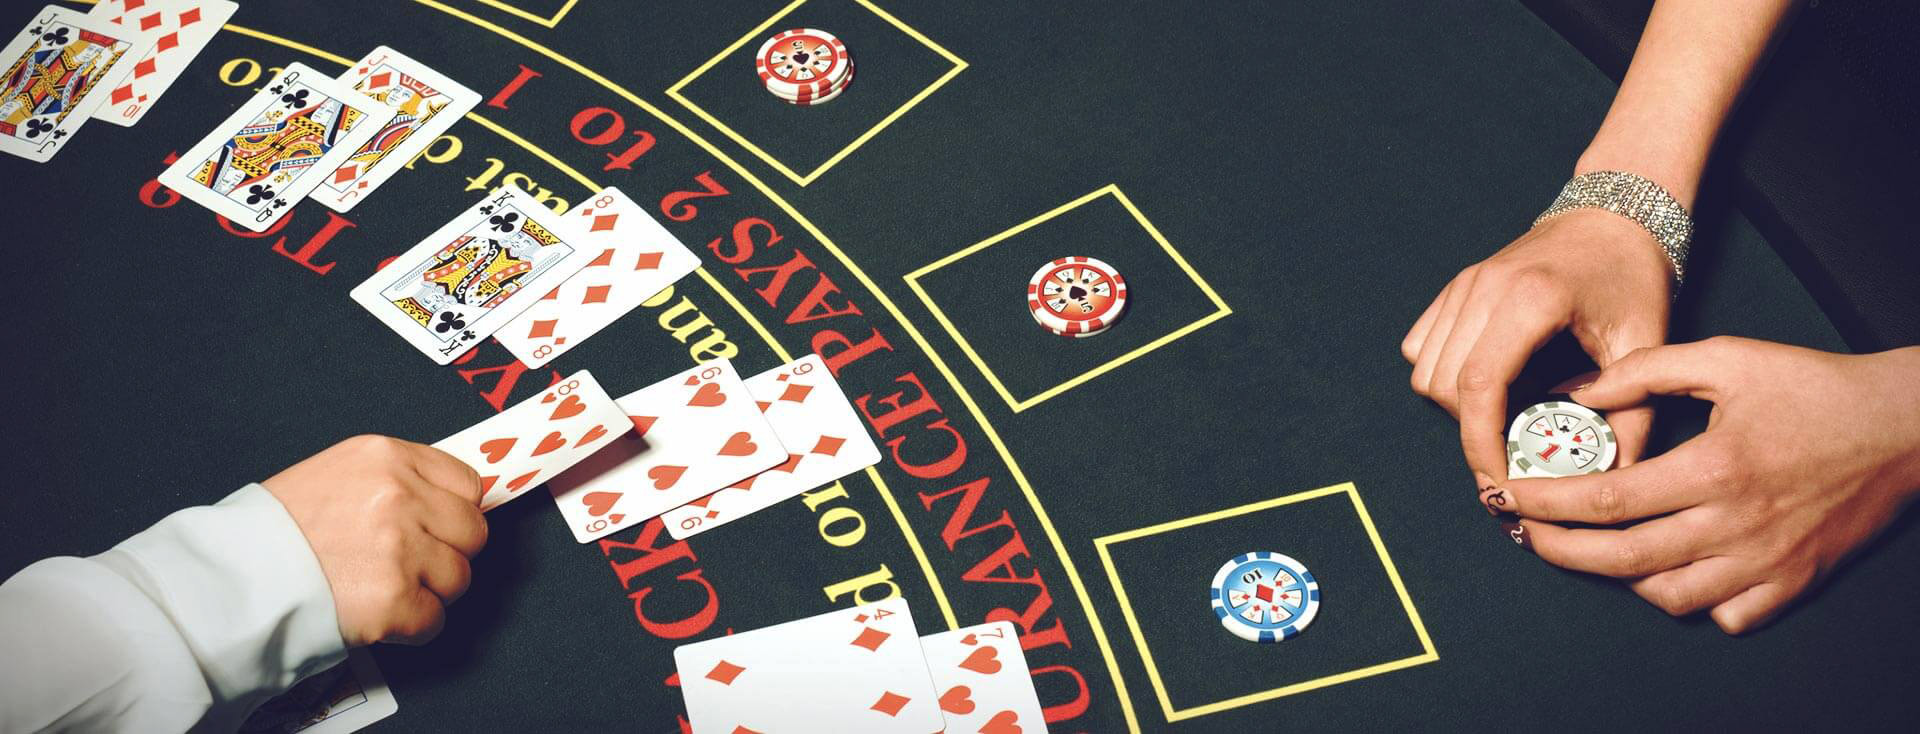 how to play casino blackjack and win